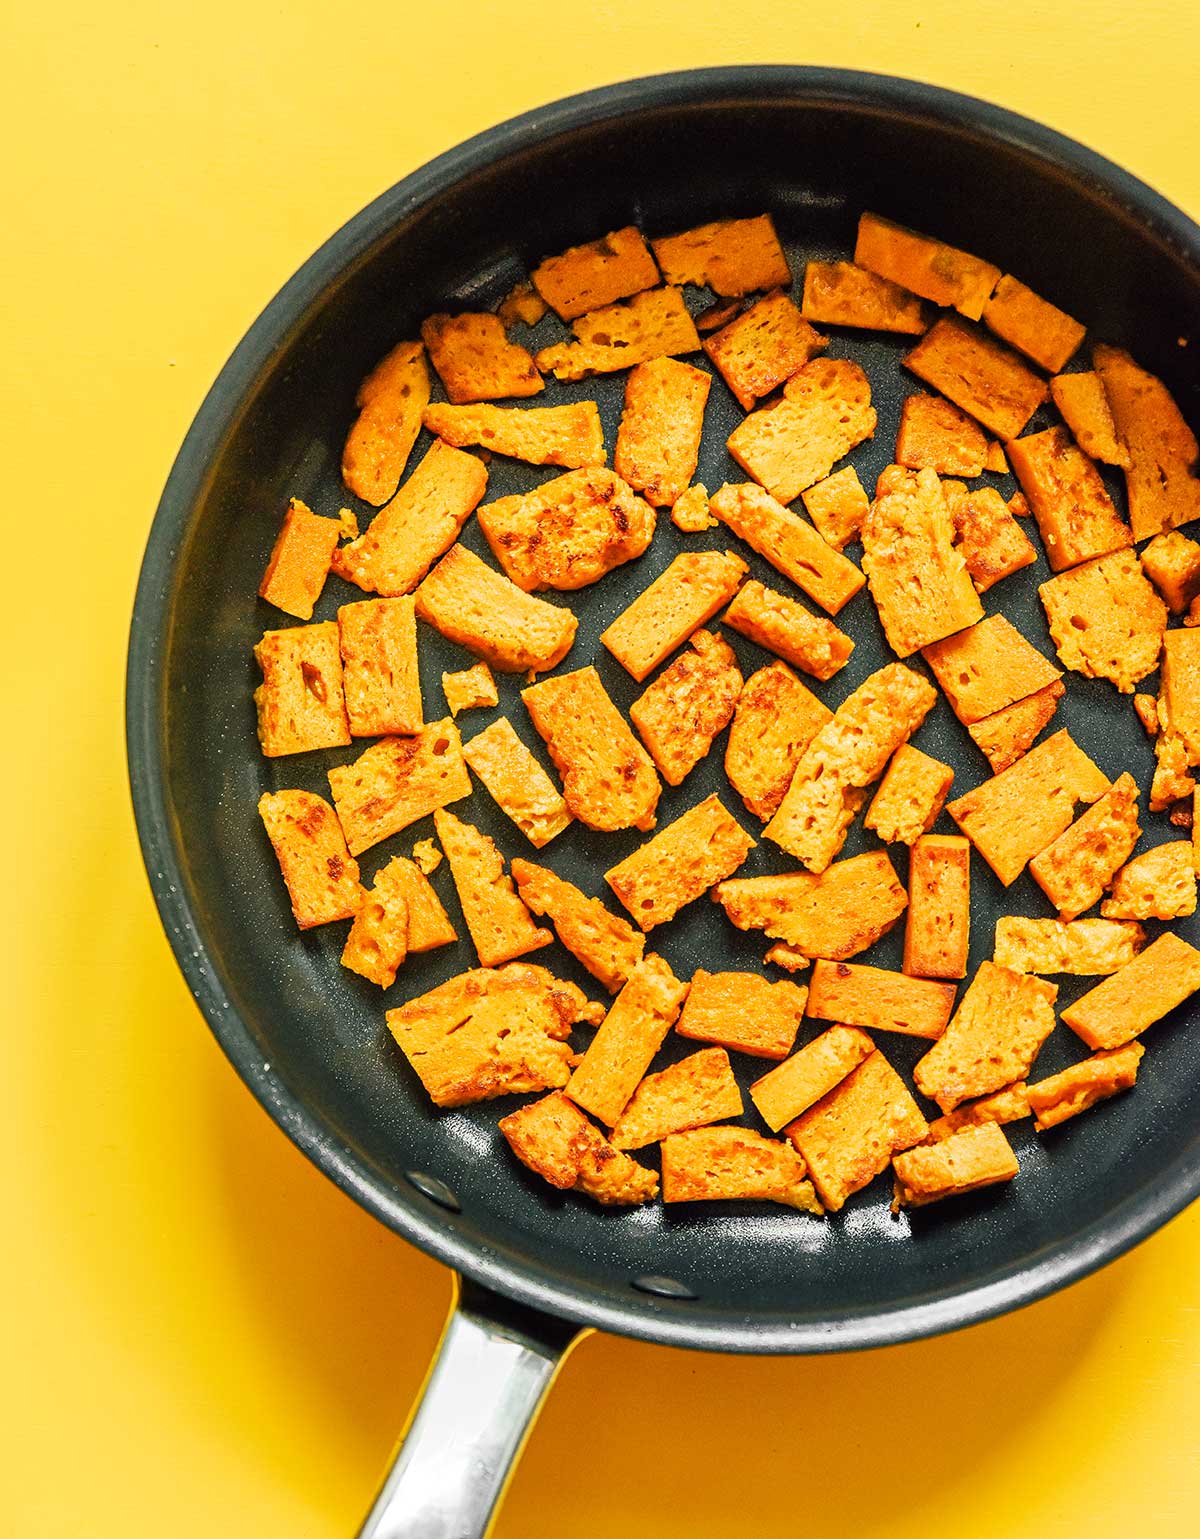 A skillet filled with an even layer of cubed, uncooked seitan 